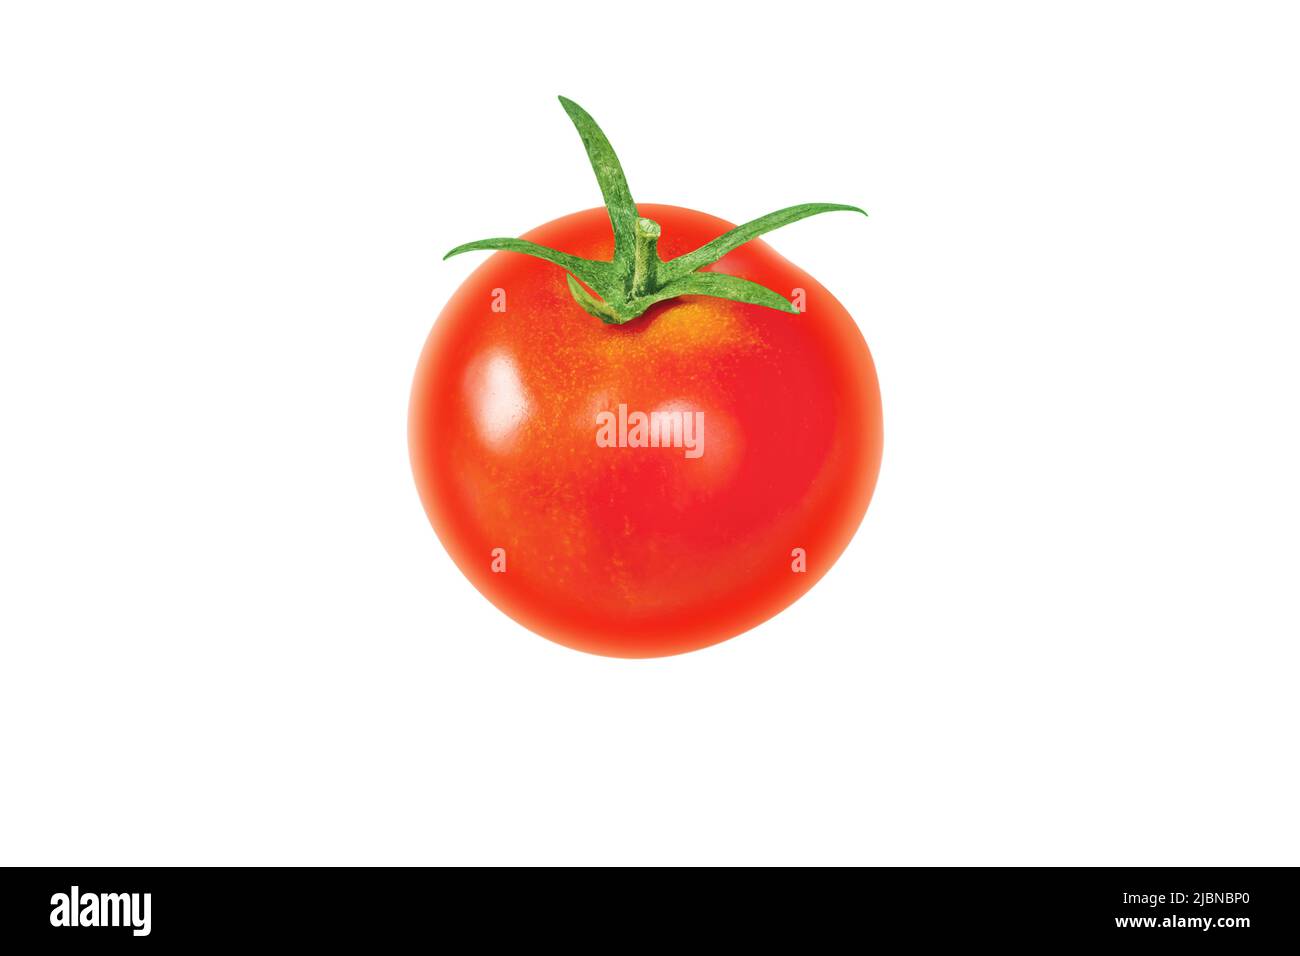 Single red tomato whole vegetable with green tail isolated on white. Solanum lycopersicum ripe fruit. Stock Photo